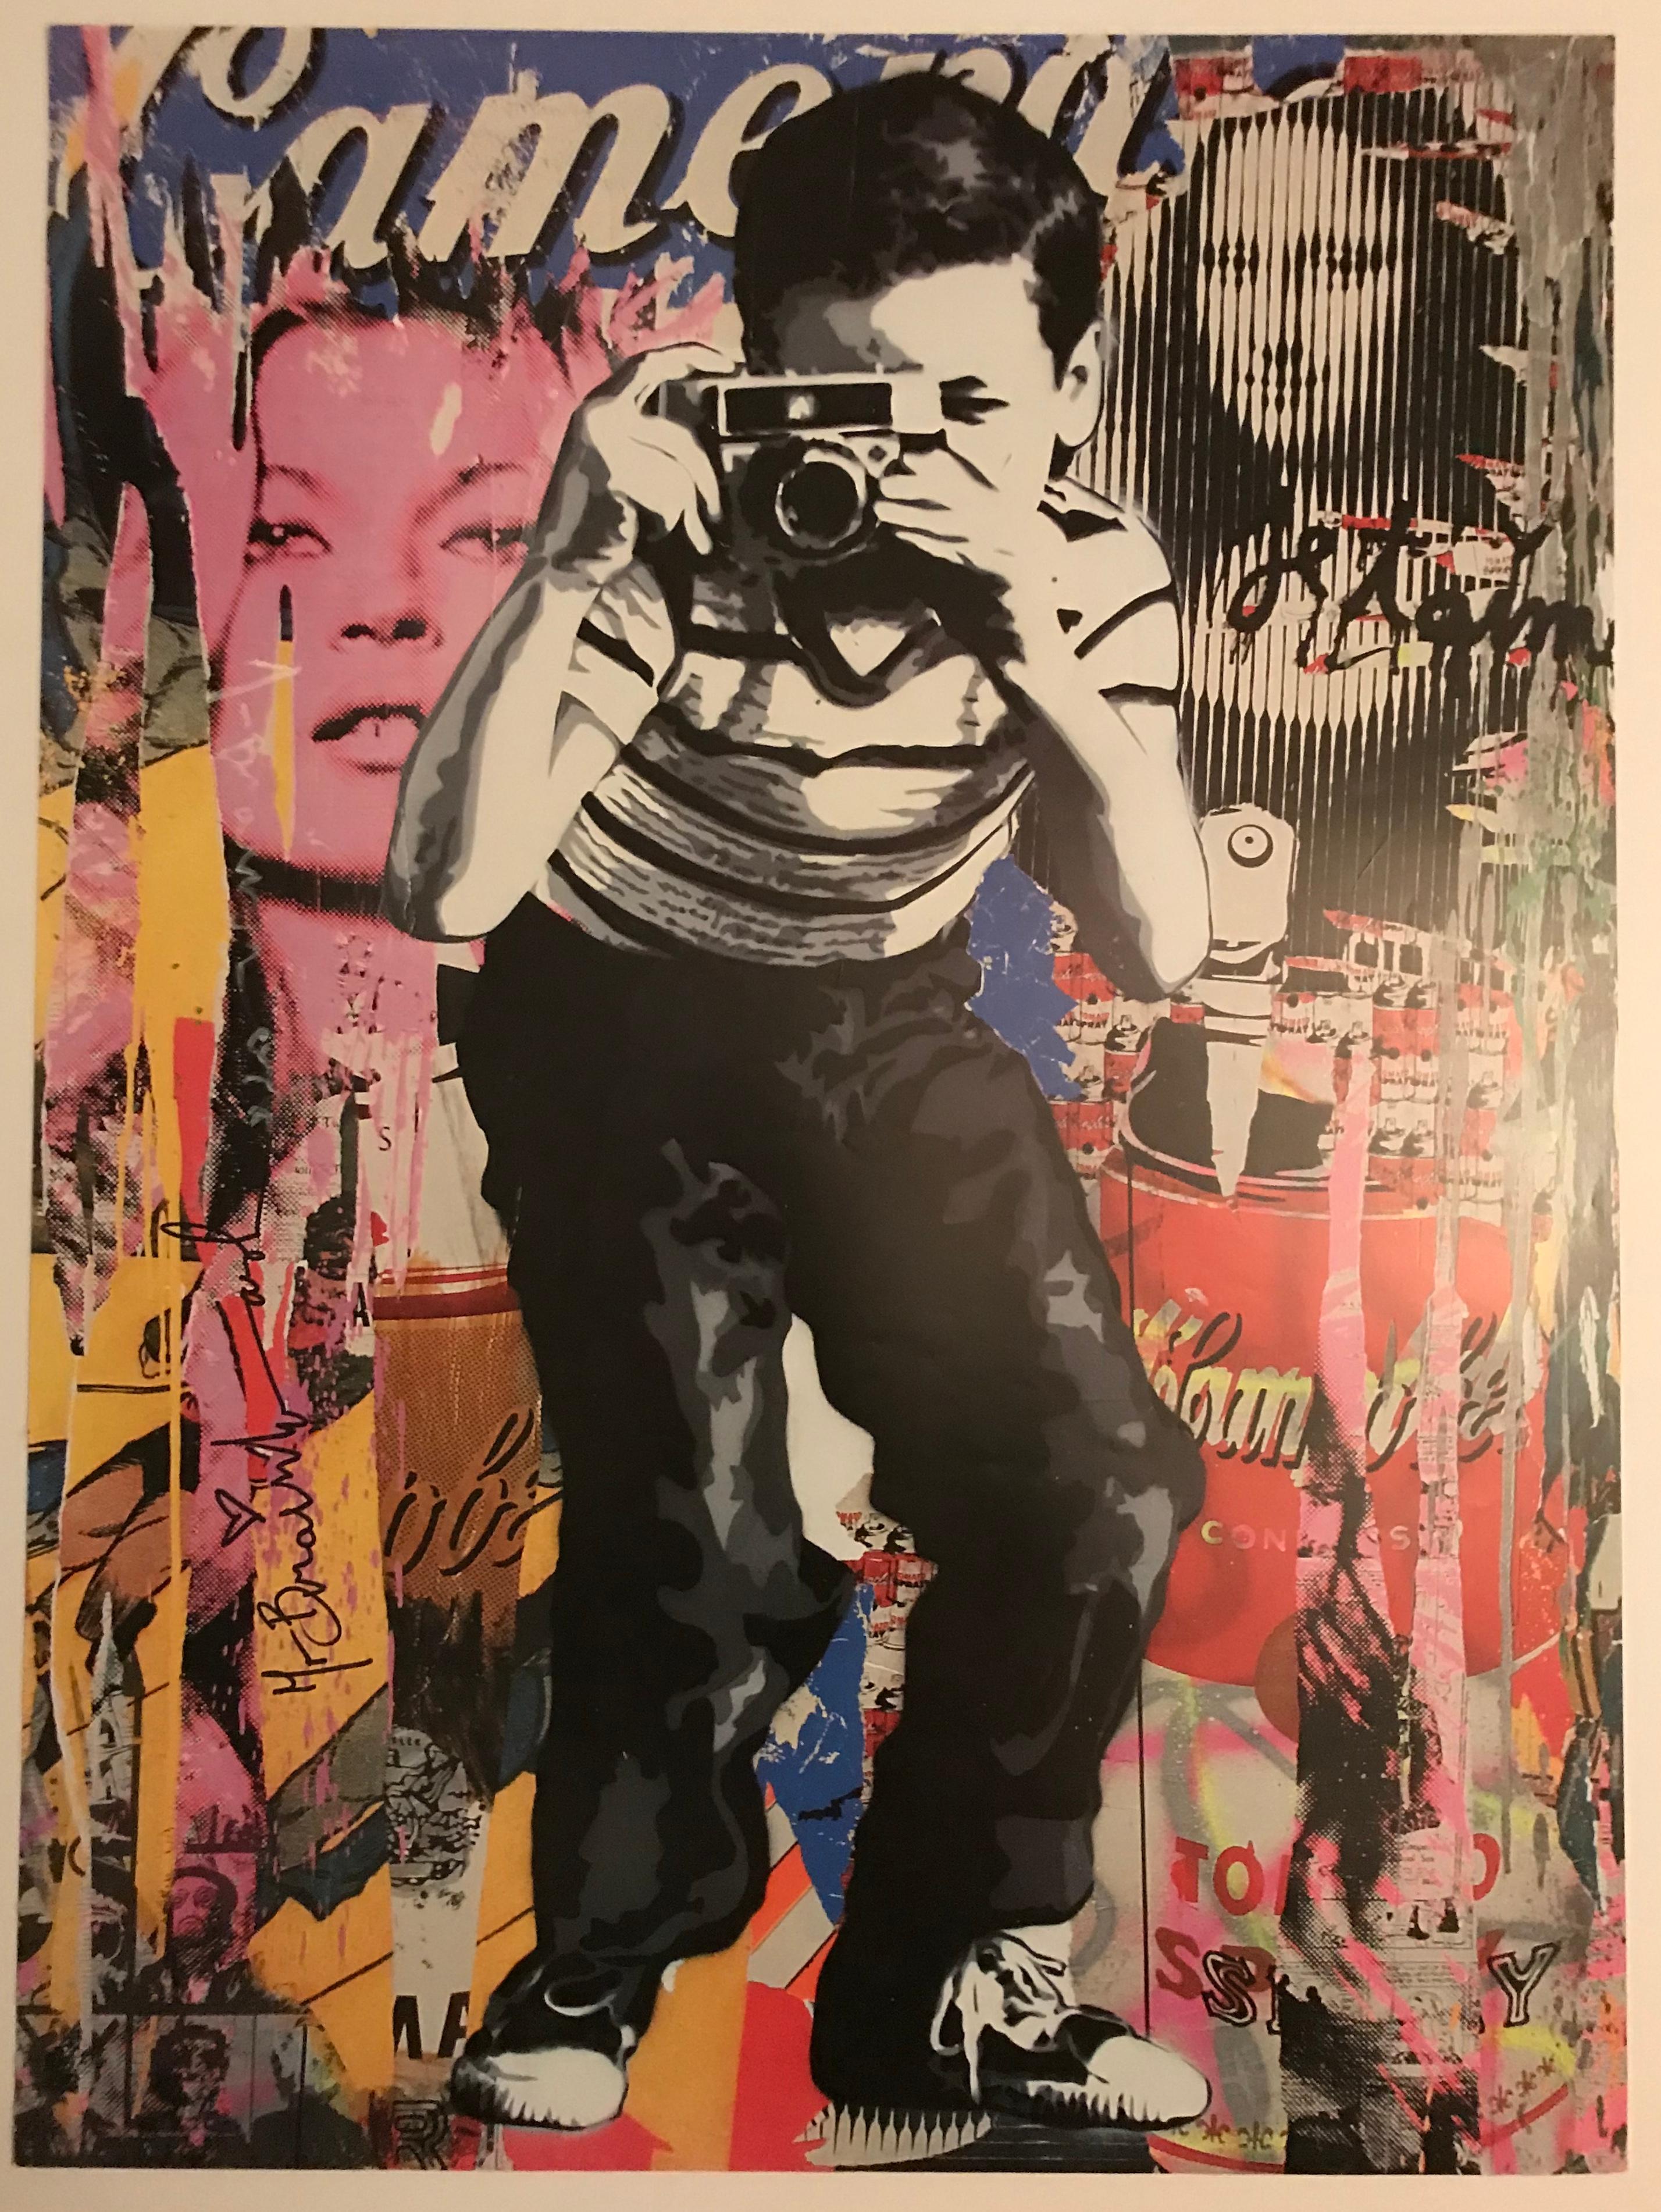 Mr. Brainwash Kate Moss Camera Lithograph Hand Signed NYC ICON'S Street Show en vente 9